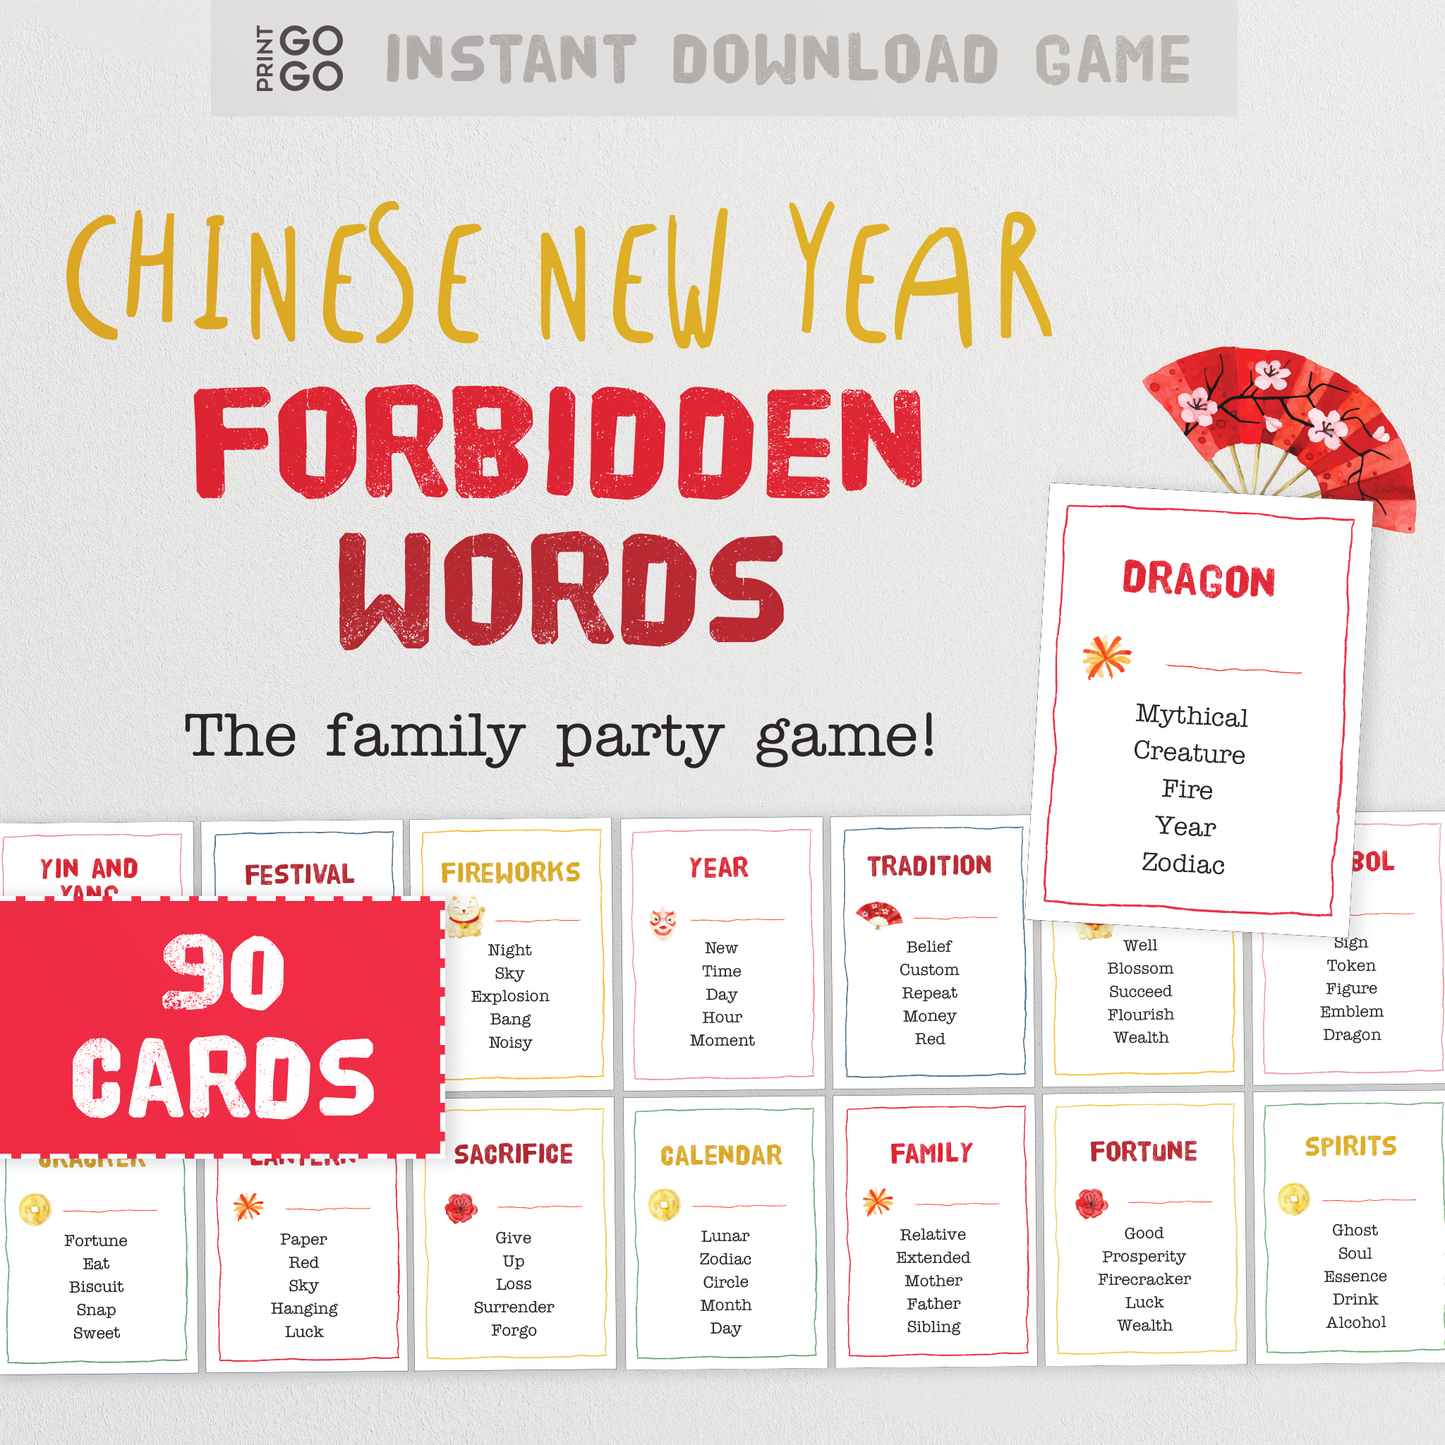 Chinese New Year Forbidden Words - The Hilarious Party Game of Giving Careful Clues